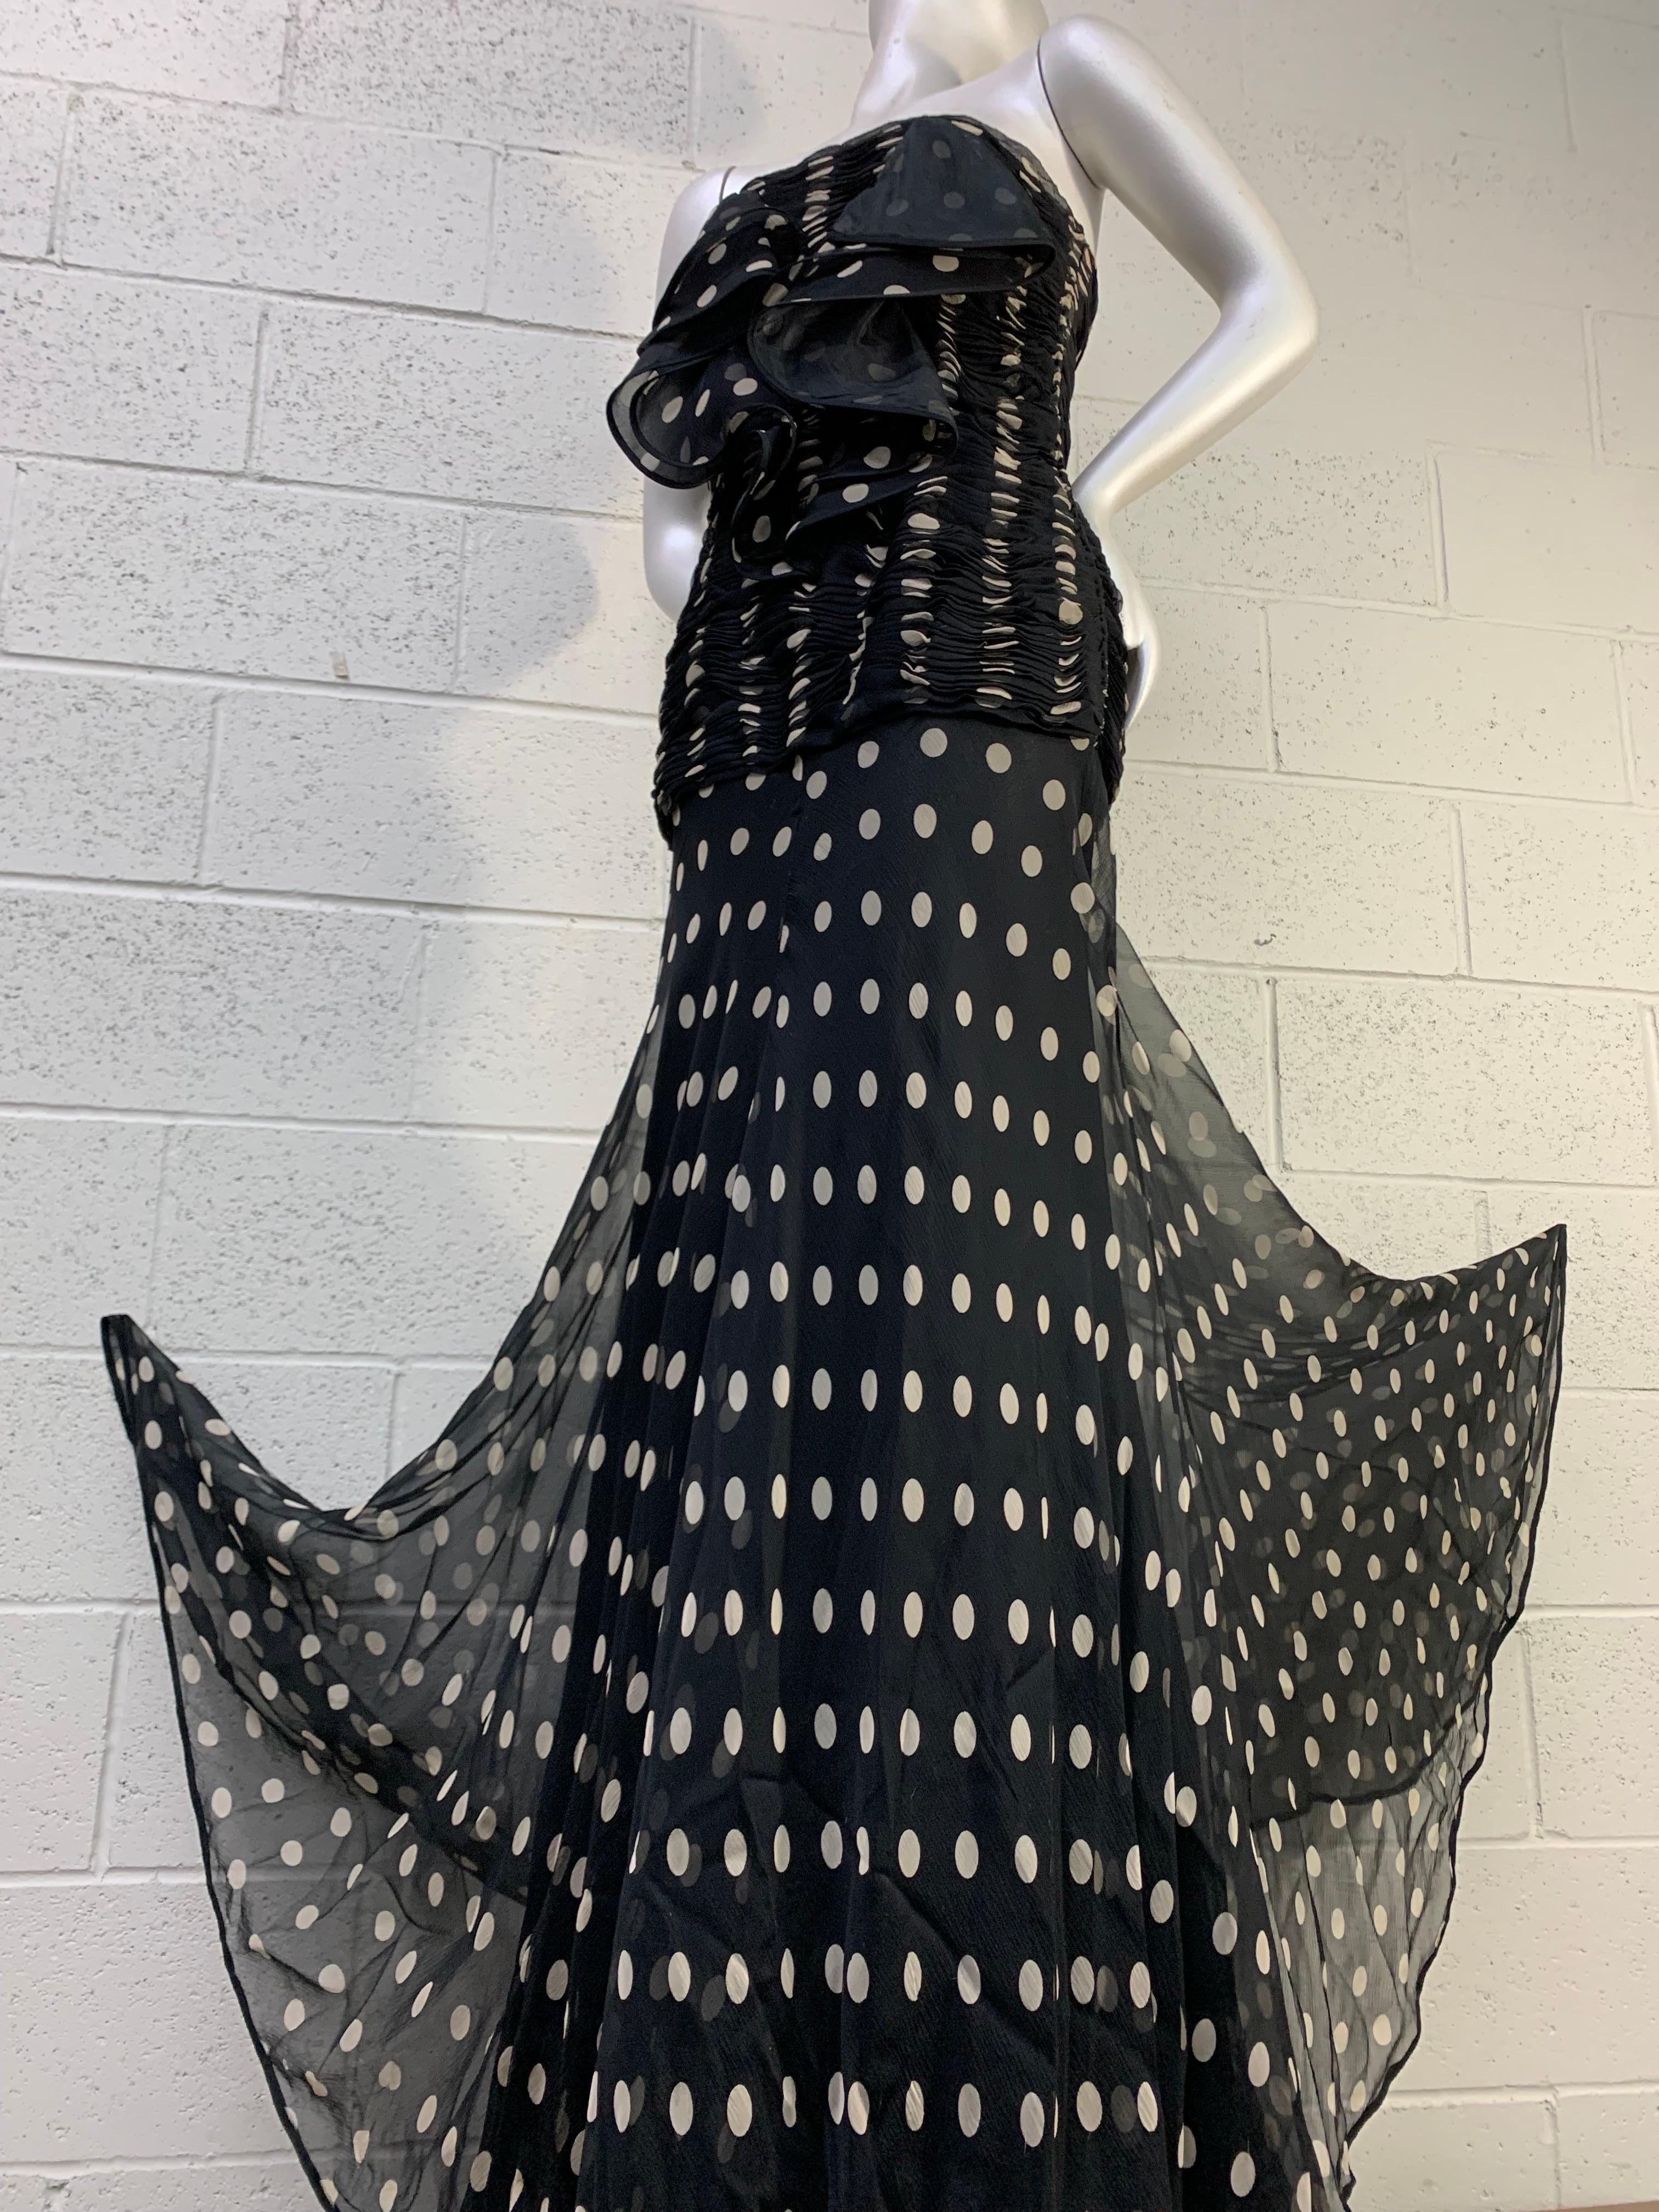 1980s Valentino Black & White Polka Dot Silk Chiffon Strapless Gown w Fishtail Train: Structured corset under a gorgeous ruched bodice and hip with a dramatic ruffle flourish at front and train at back. 3 layer skirt construction for lush movement.